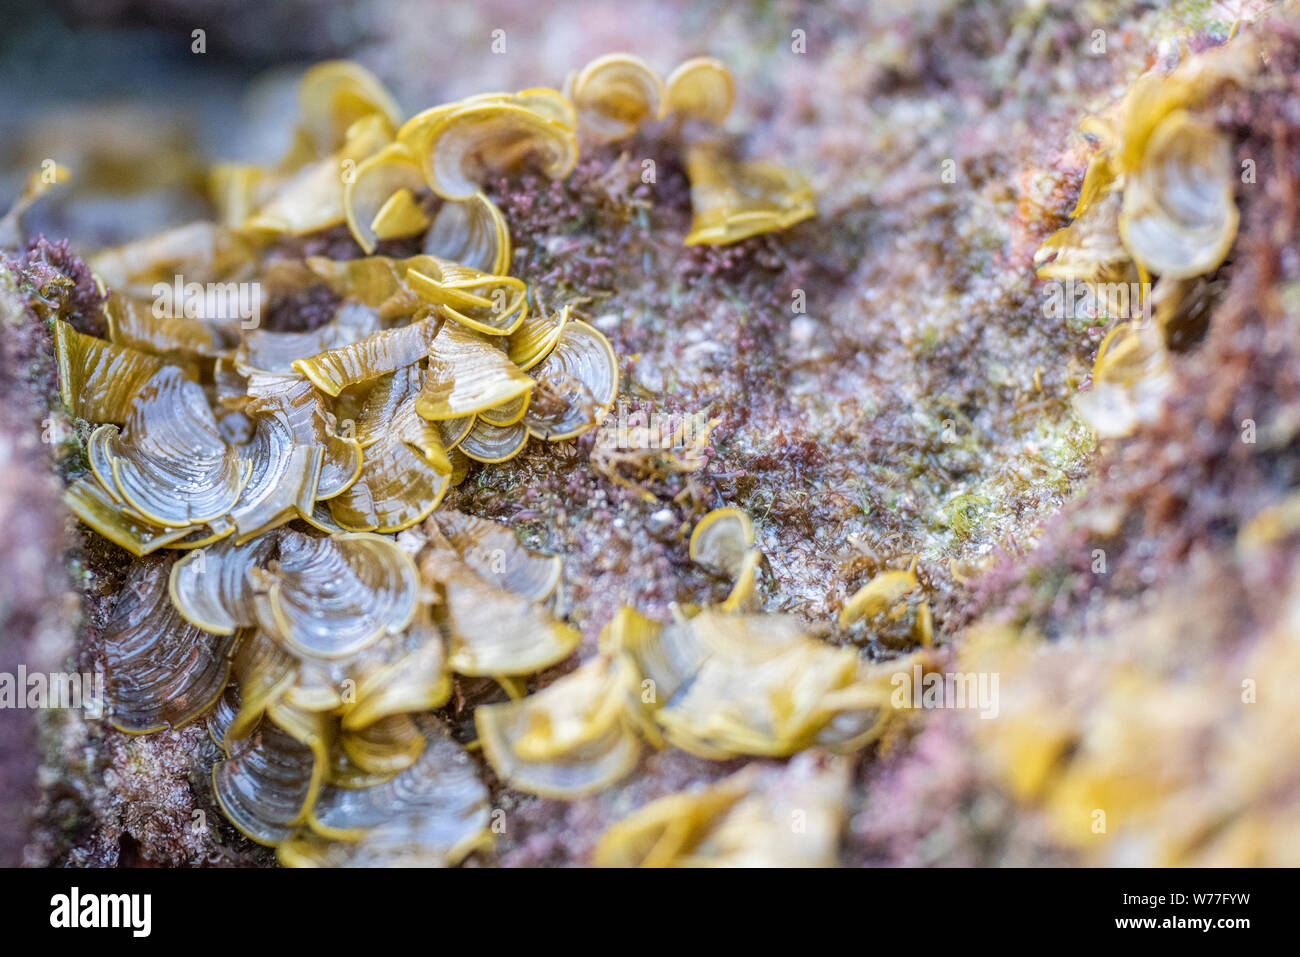 Brown algae of the genus Padina Pavonica on a rock after low tide, close-up. Thailand, Koh Chang island. Stock Photo